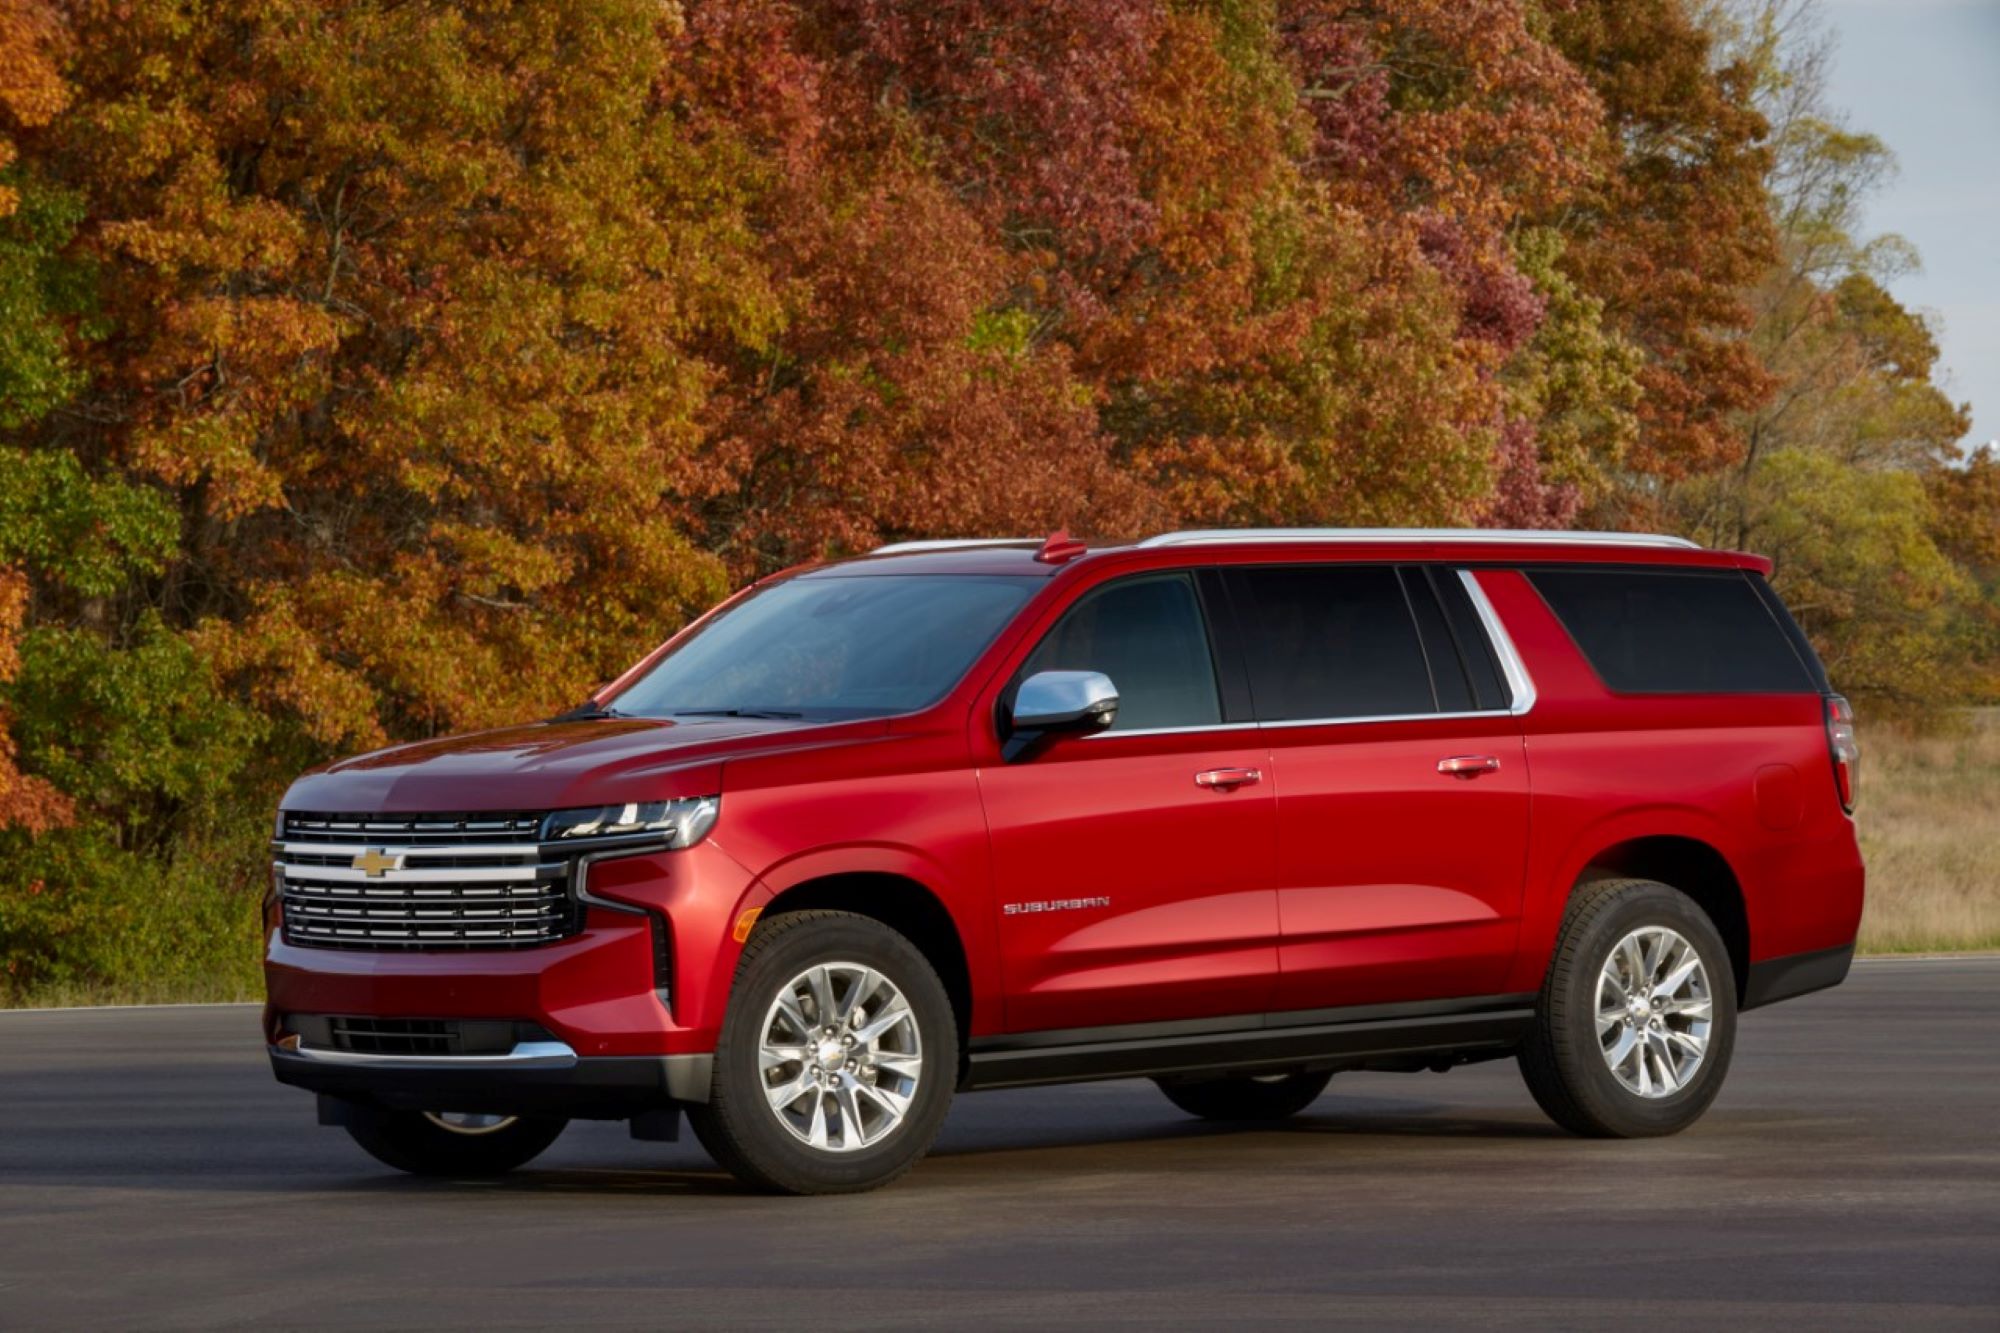 A red 2022 Chevrolet Suburban parked outdoors in front of a wooded area.